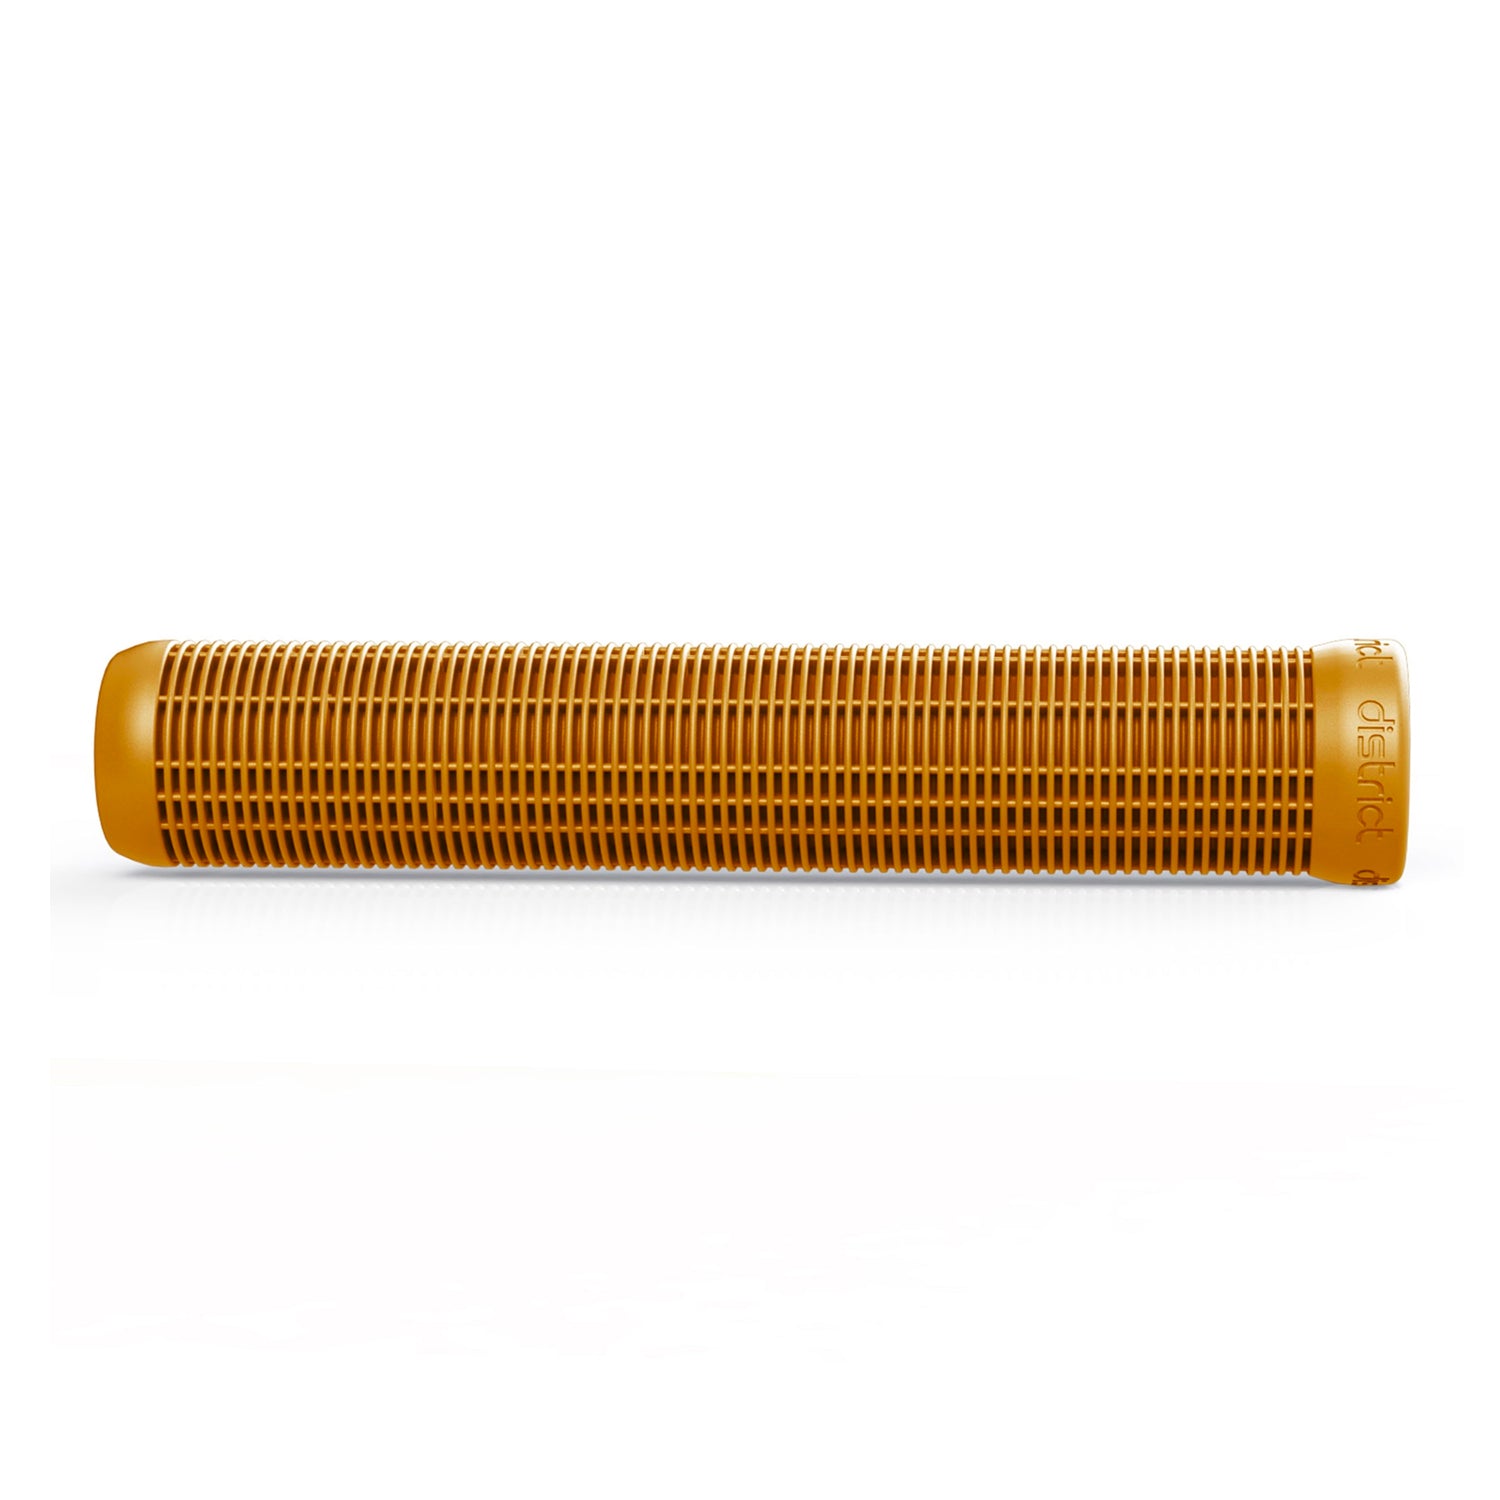 District S-Series G15S Grips Standard 140mm Gum - Prime Delux Store